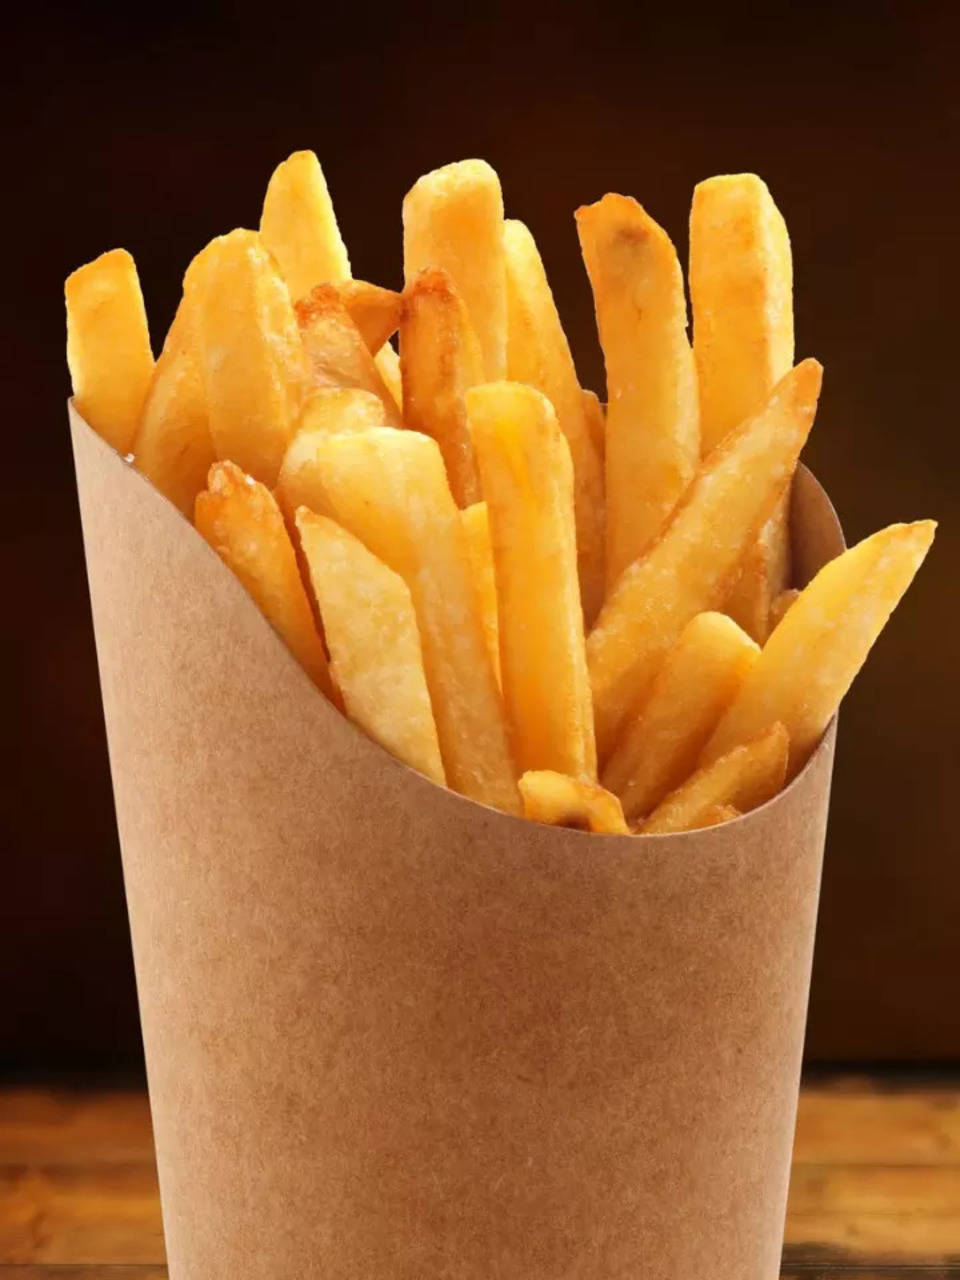 Perfect French Fries Potatoes In Red And Yellow Paper Bag